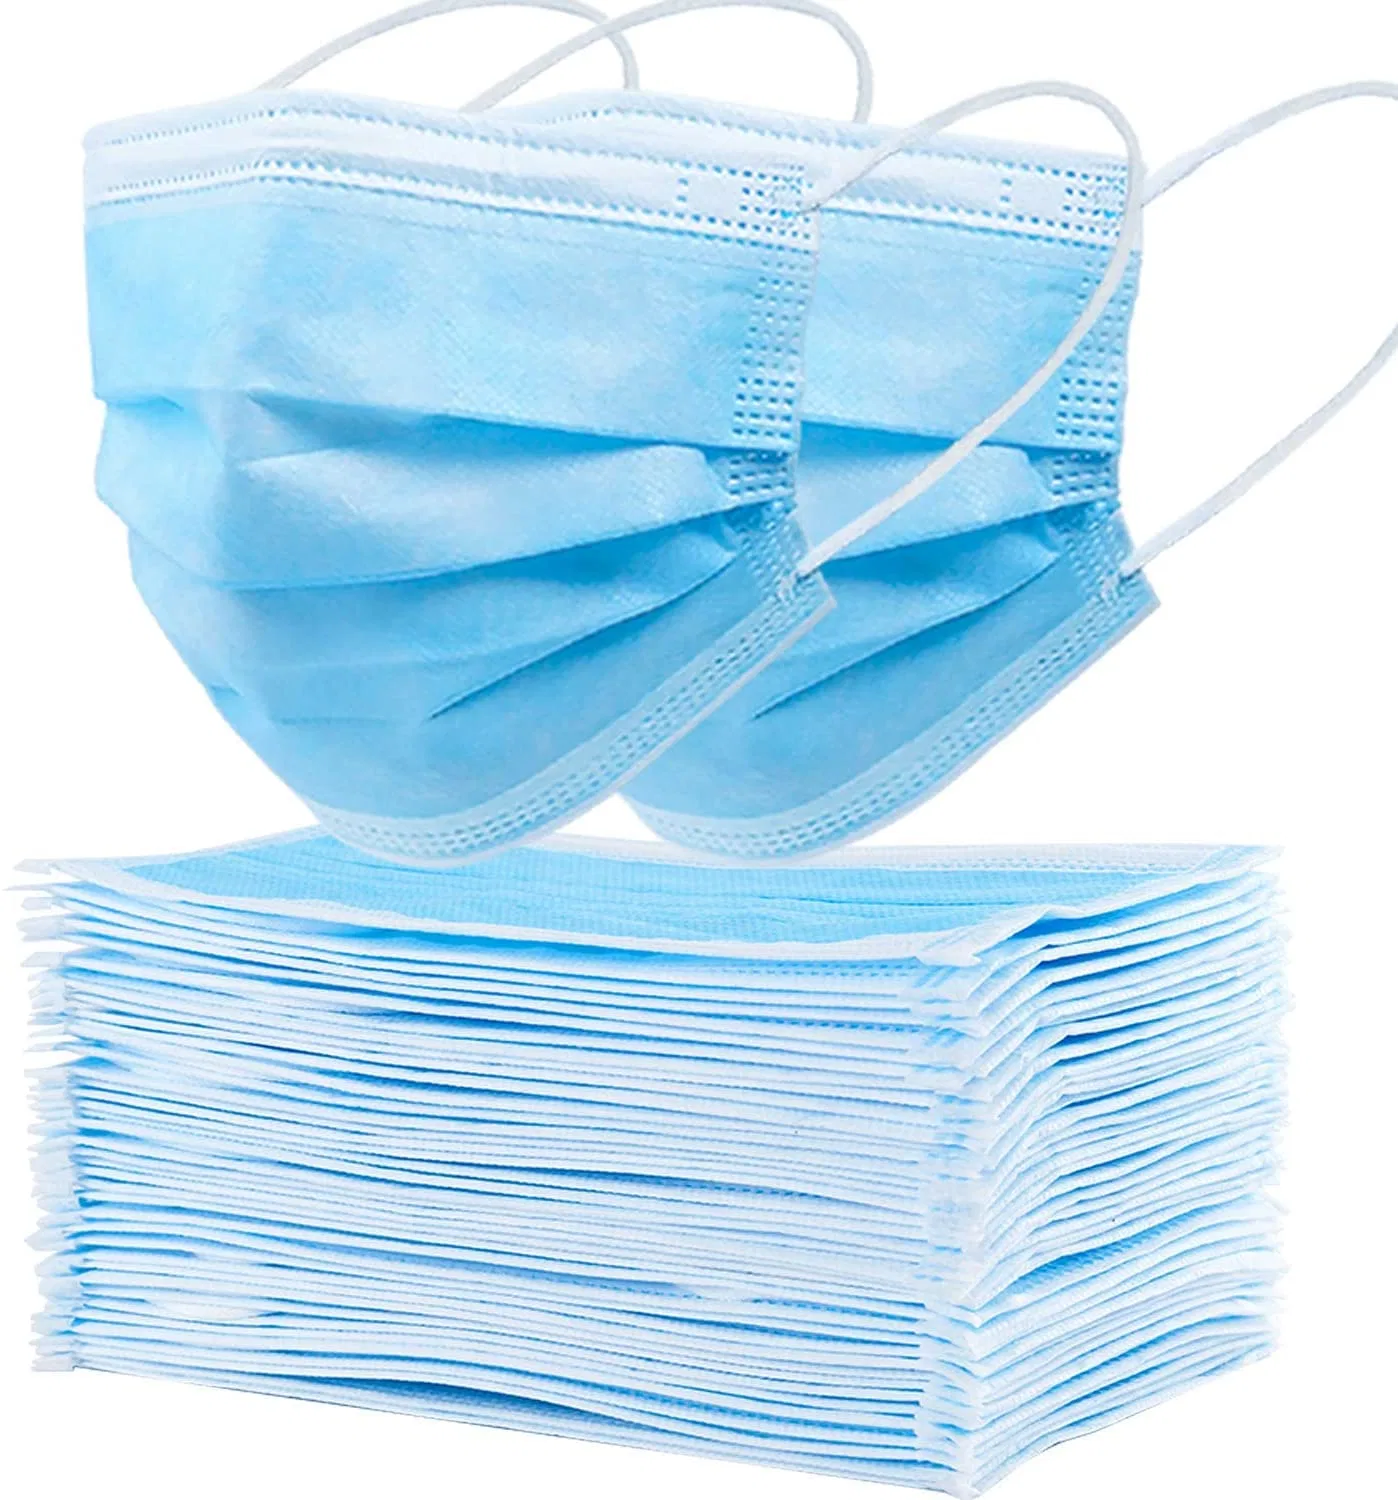 Wholesale/Supplier Medical Surgical Mask Nonwoven 3 Ply Disposable Face Mask